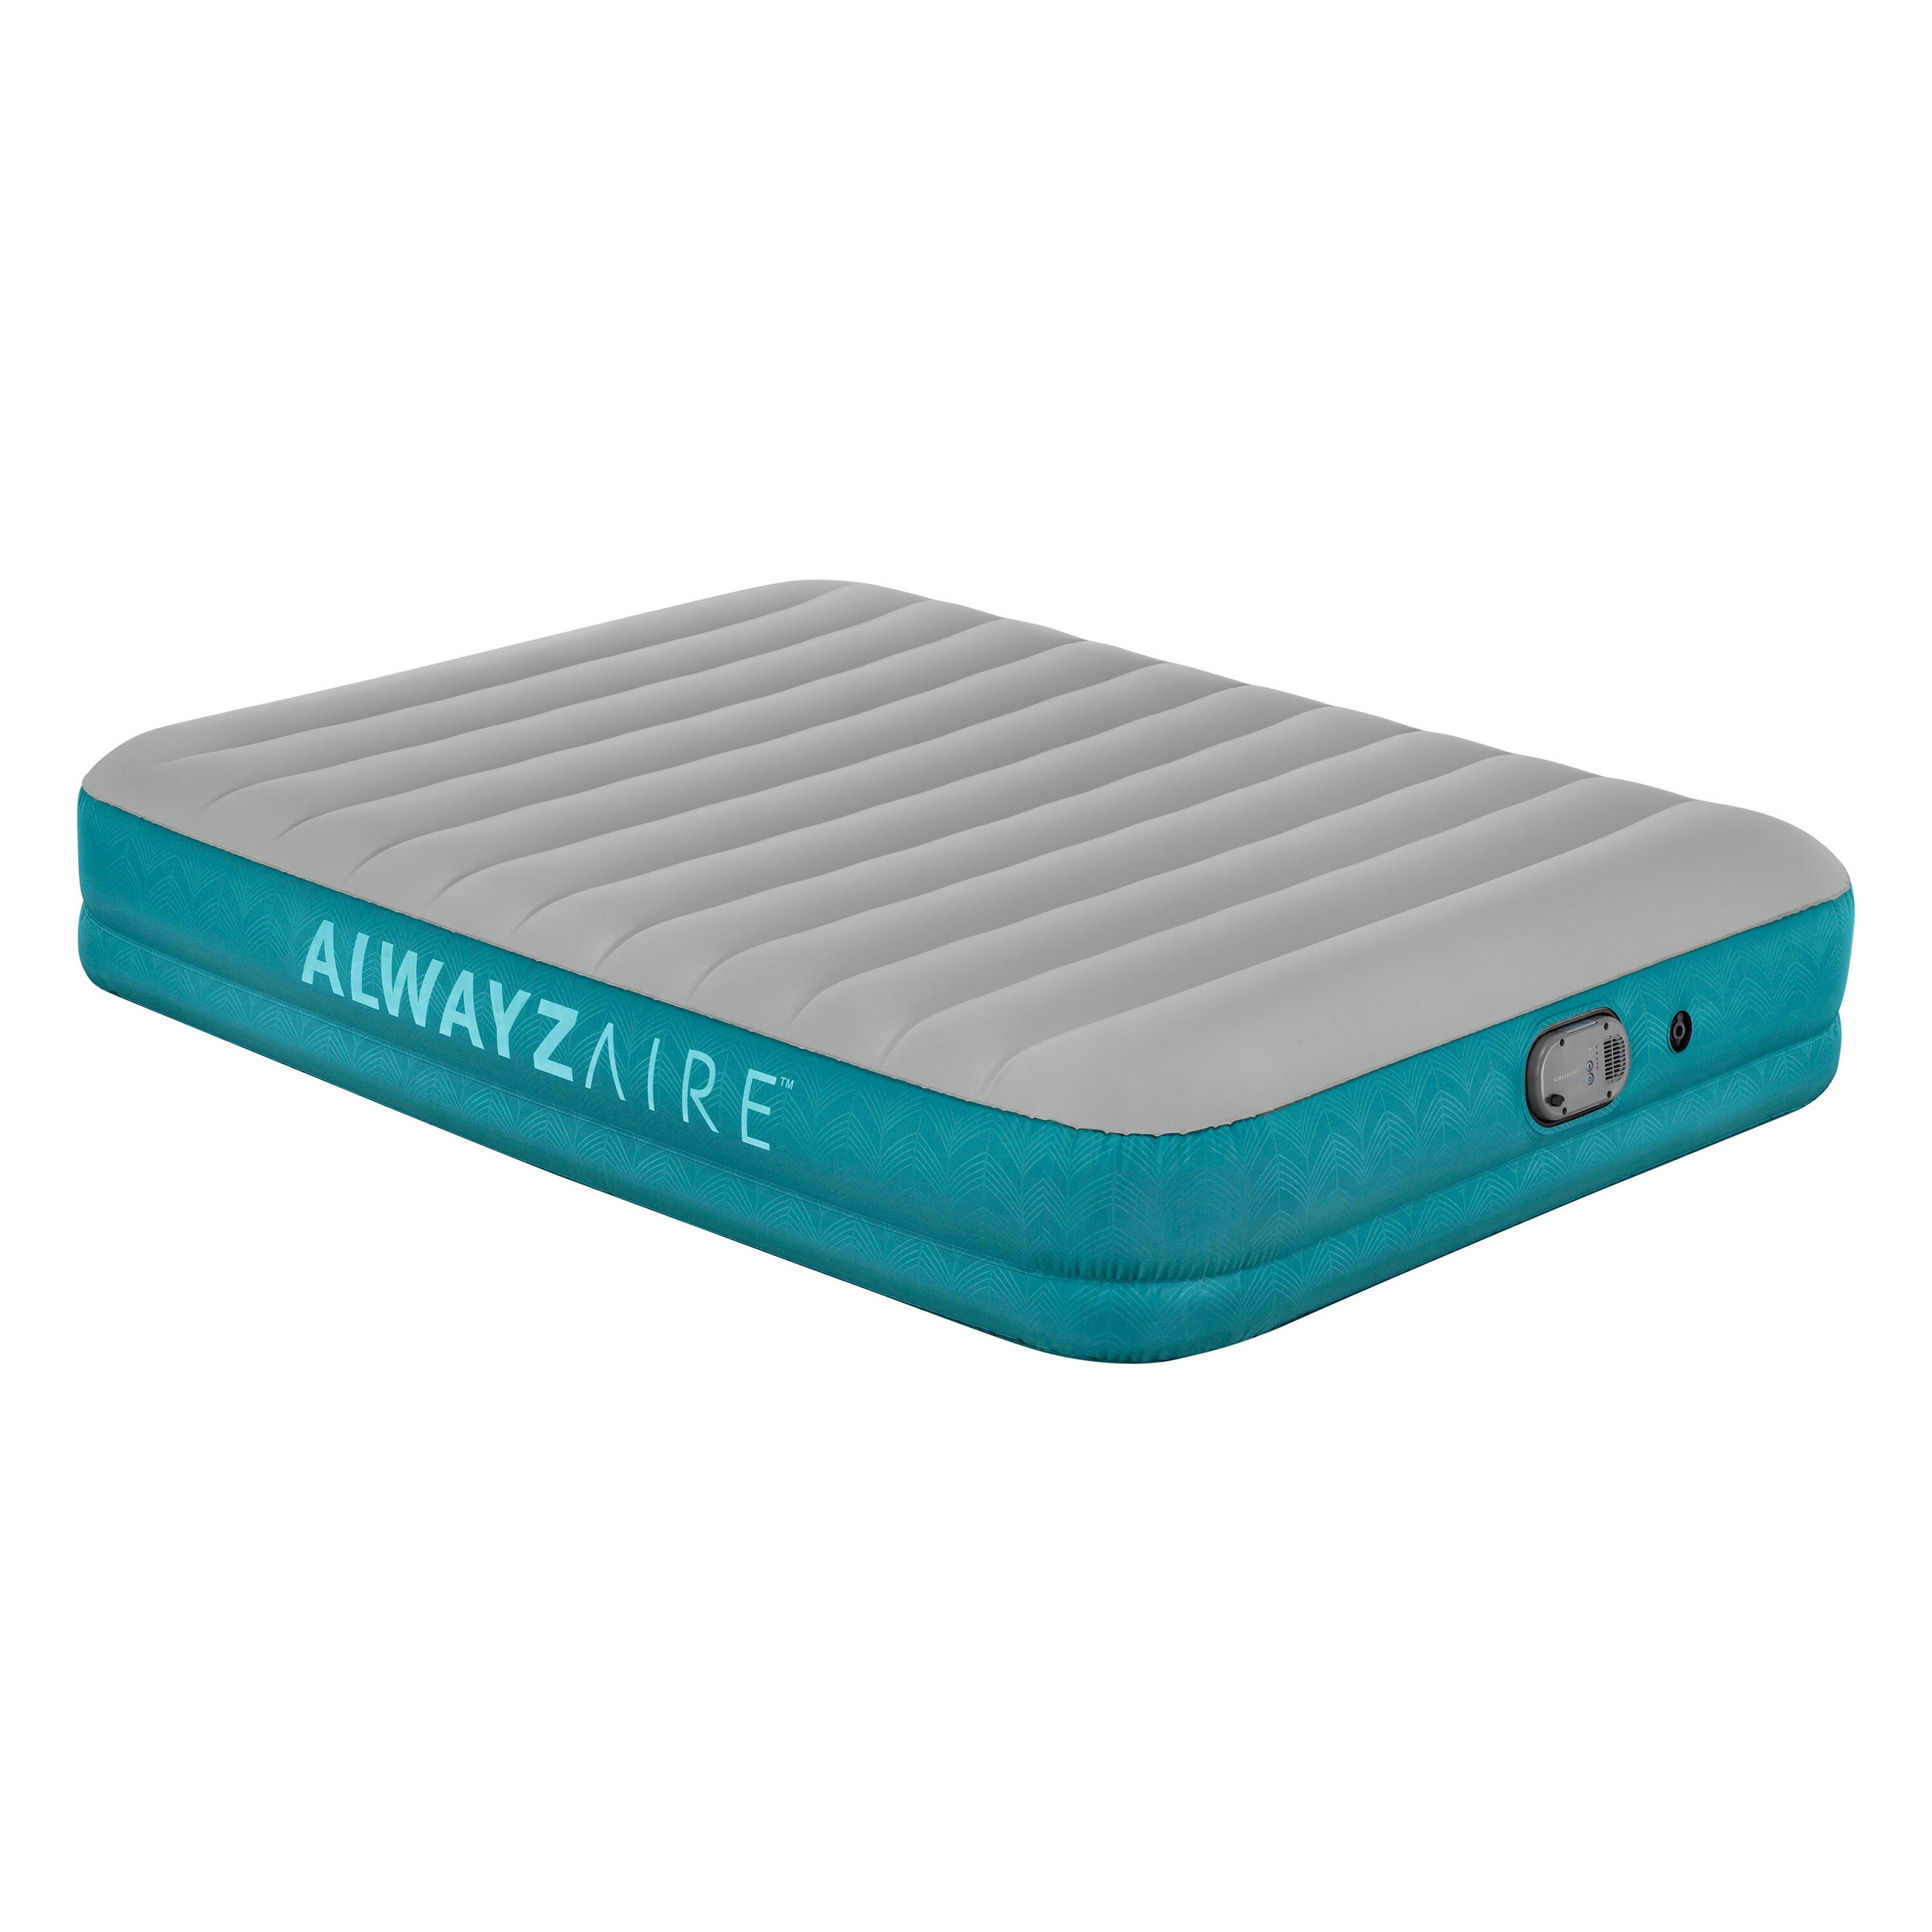 BESTWAY CAMPING MATTRESS WITH BUILT-IN ELECTRIC PUMP - 2 PERSON